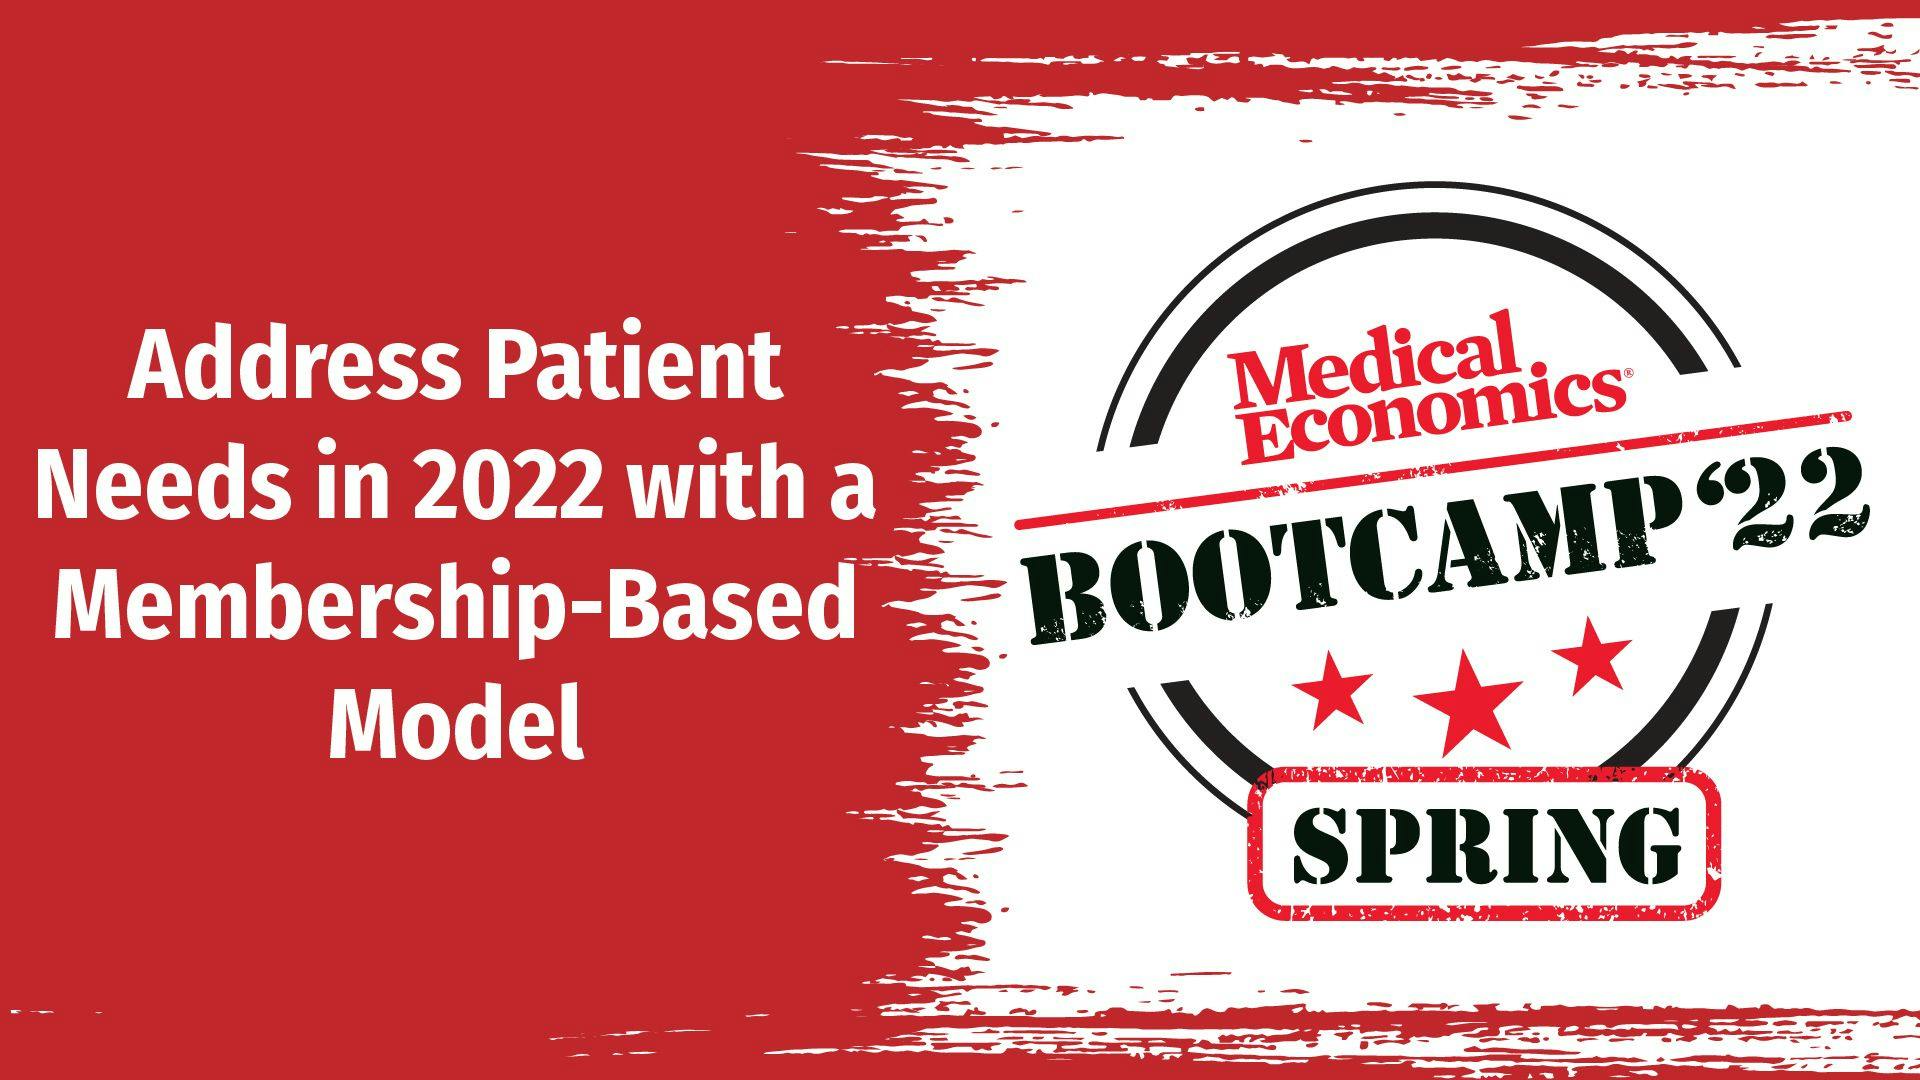 Address Patient Needs in 2022 with a Membership-Based Model